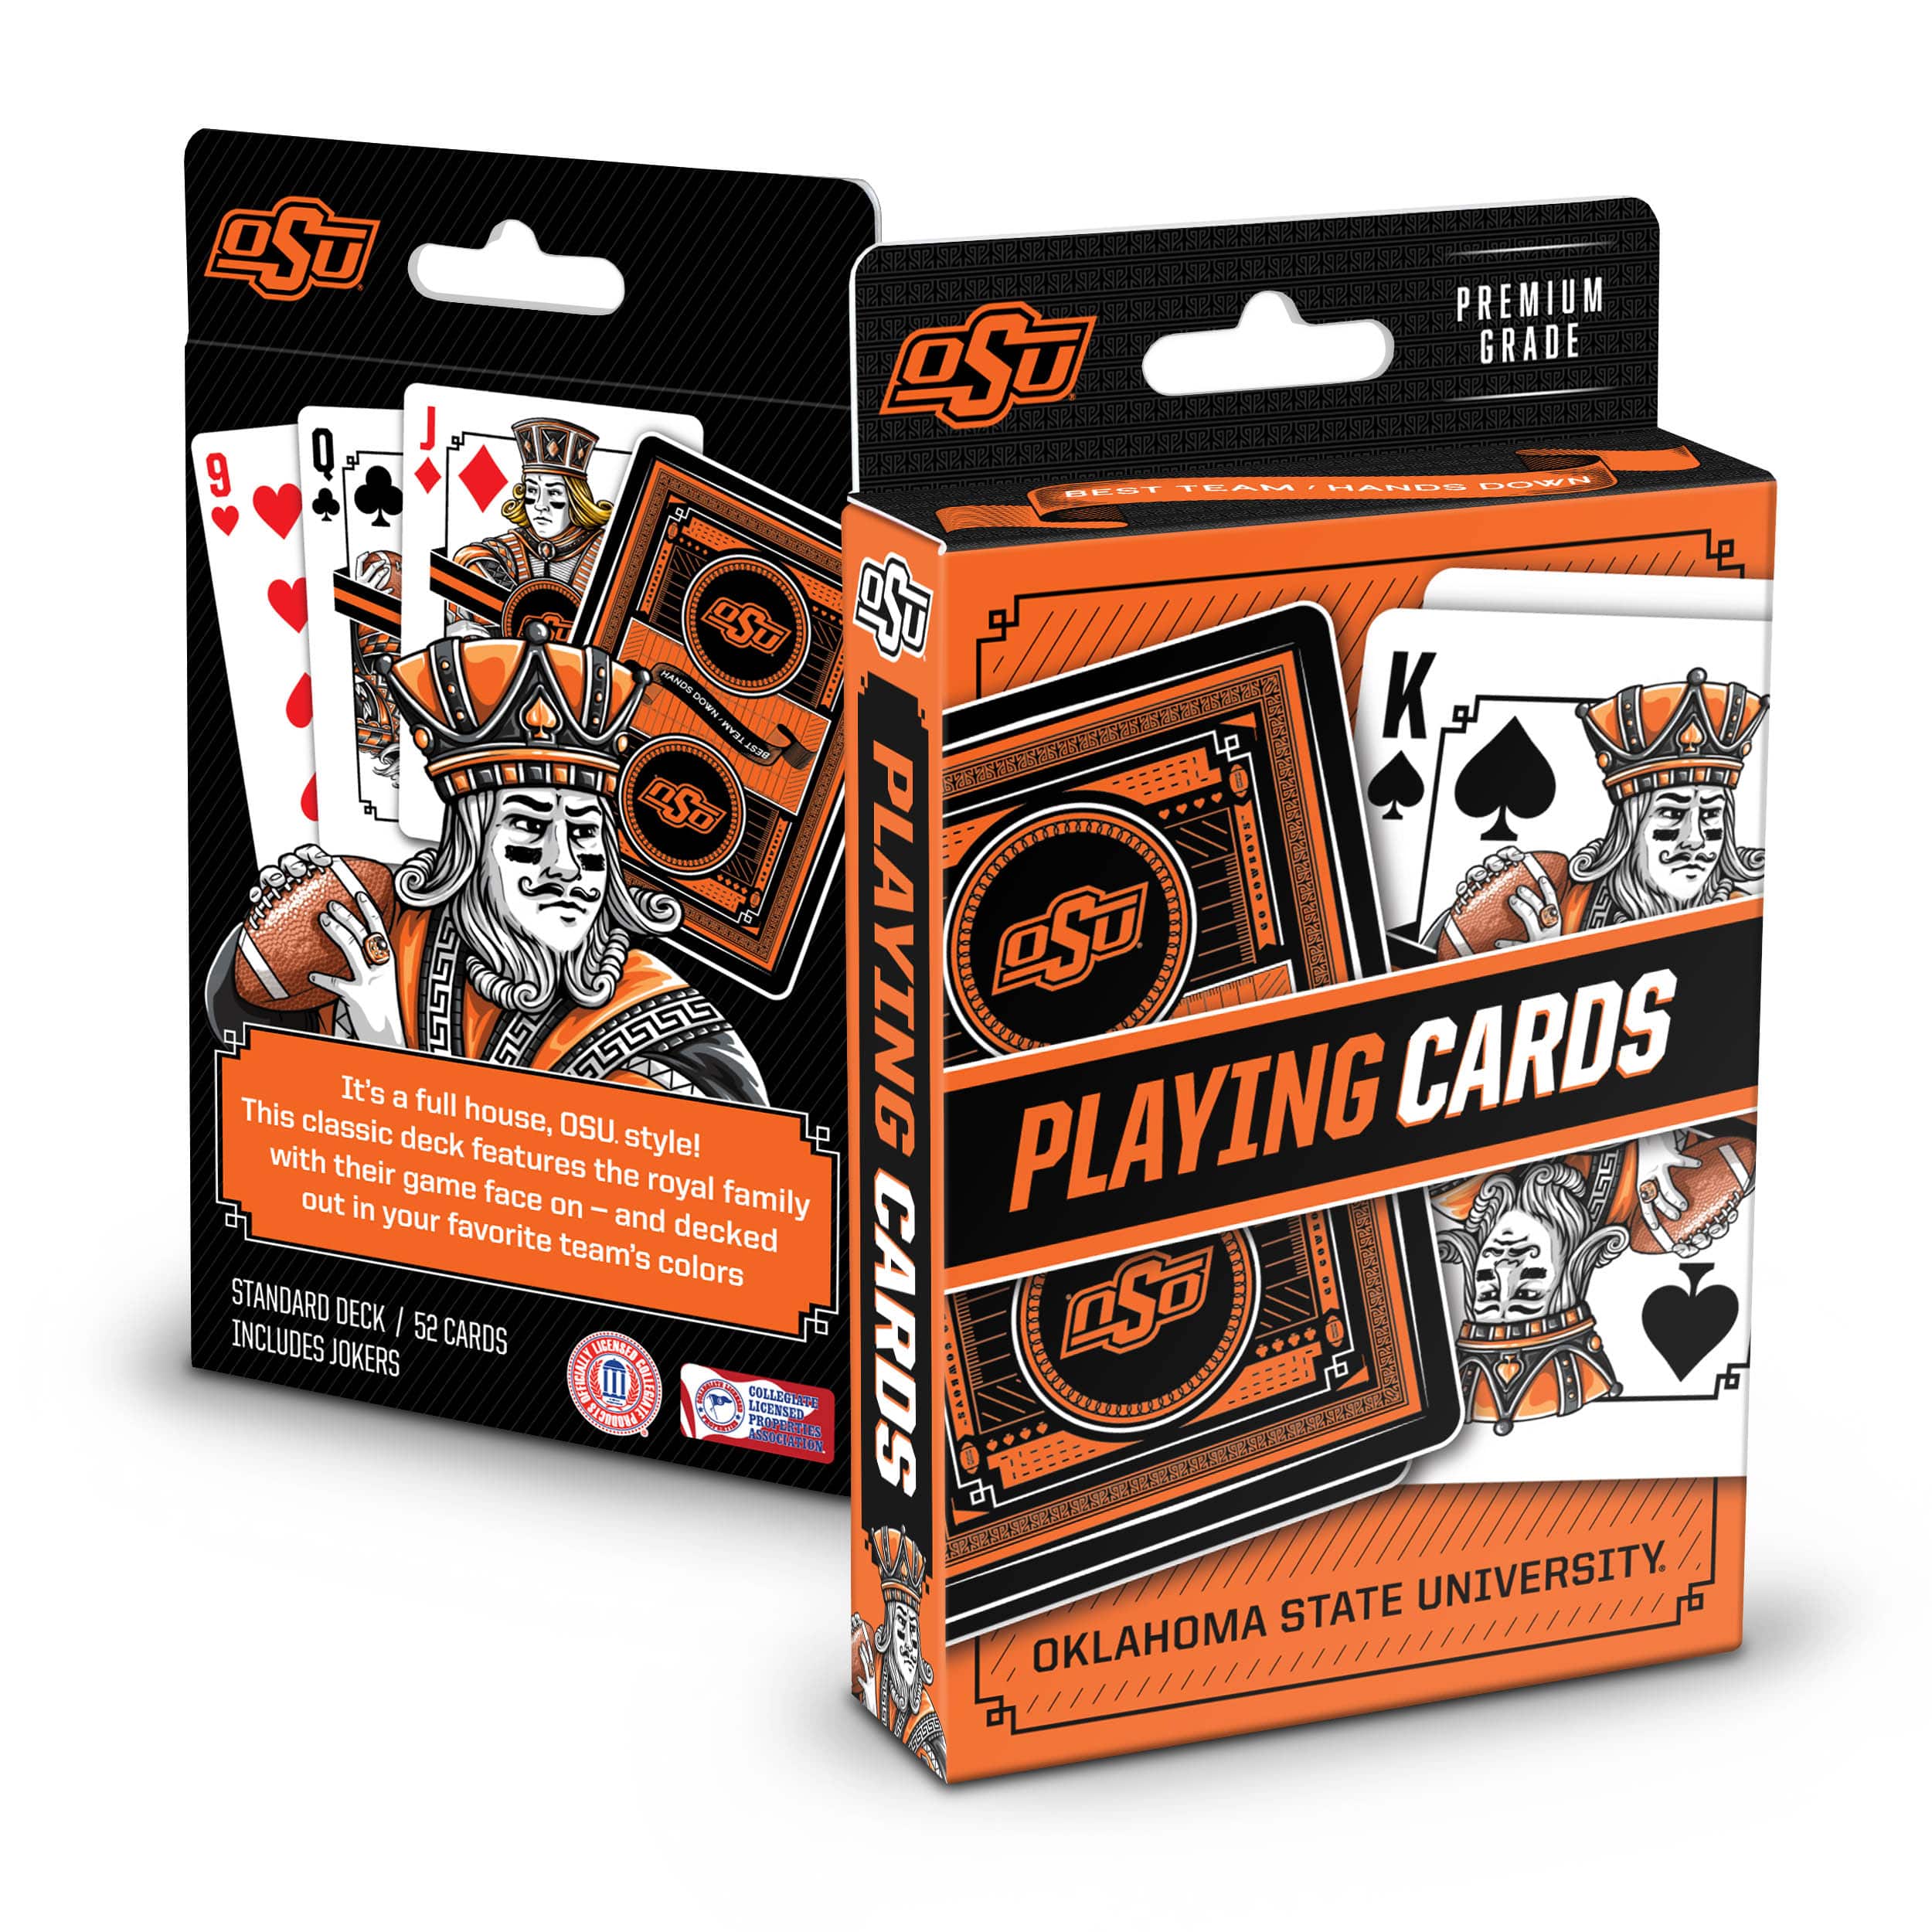 Classic Games Collection - 1 Deck Playing Cards - Classic Games